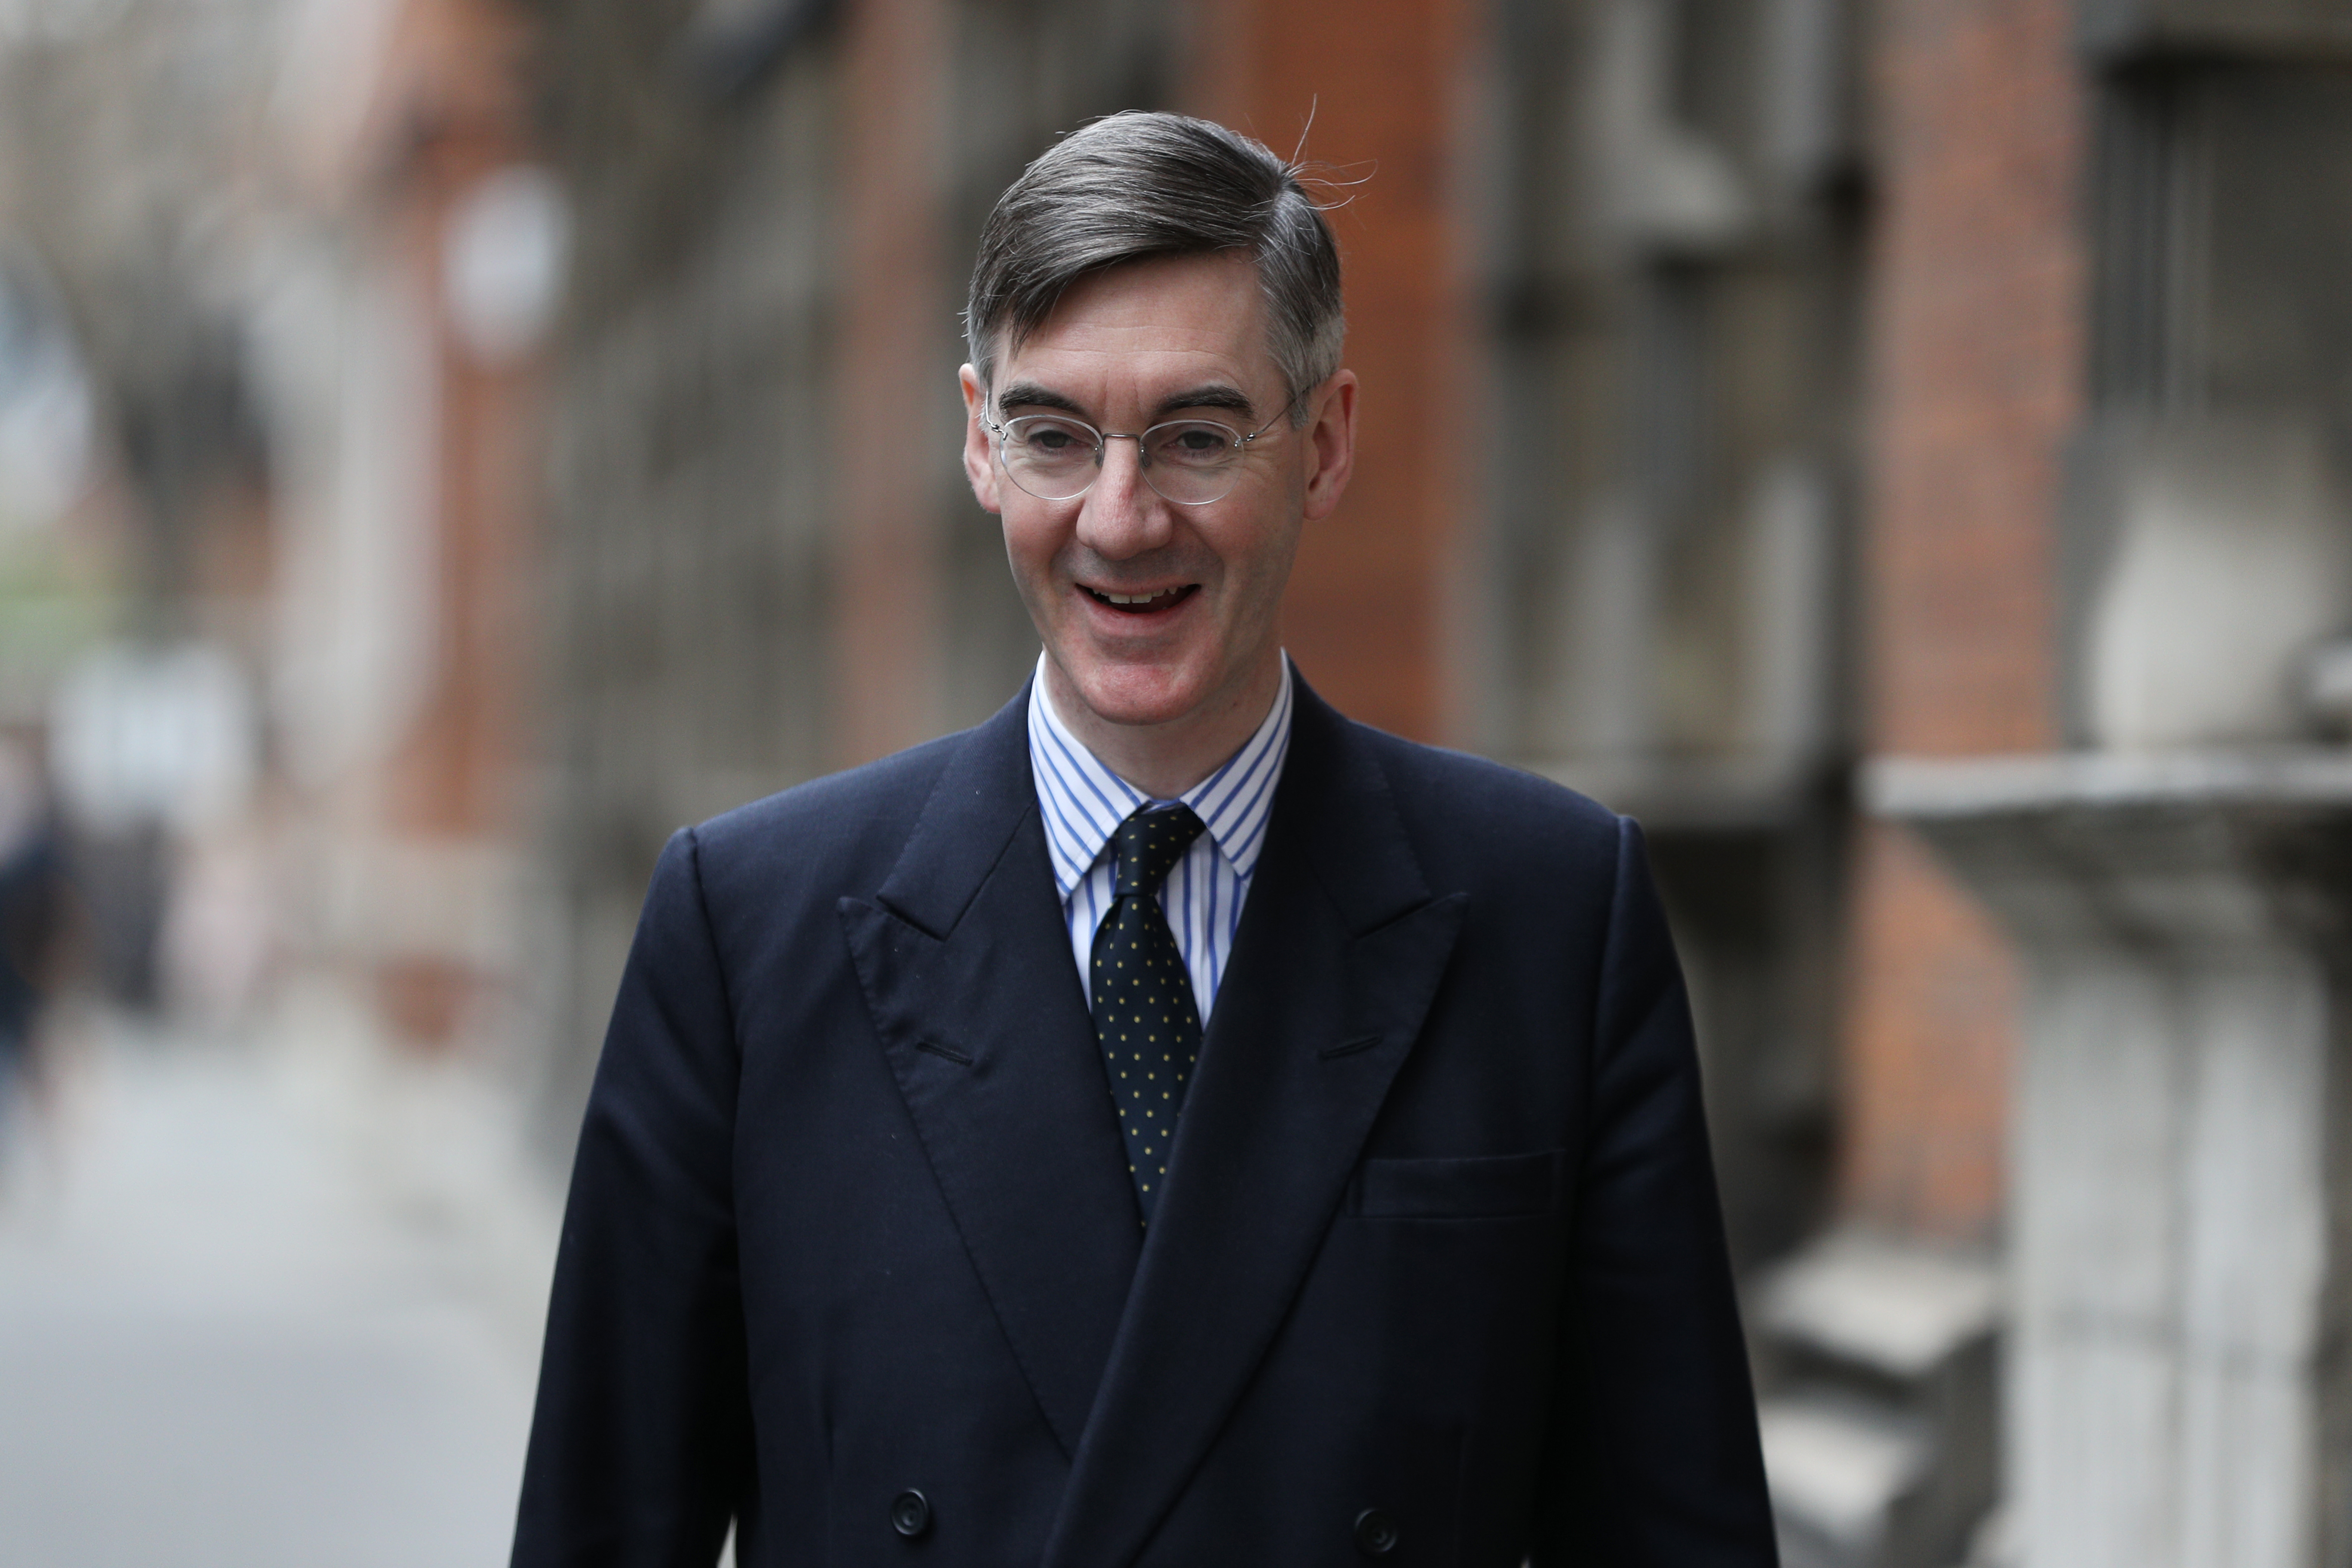 MP Jacob Rees-Mogg pictured on March 27.